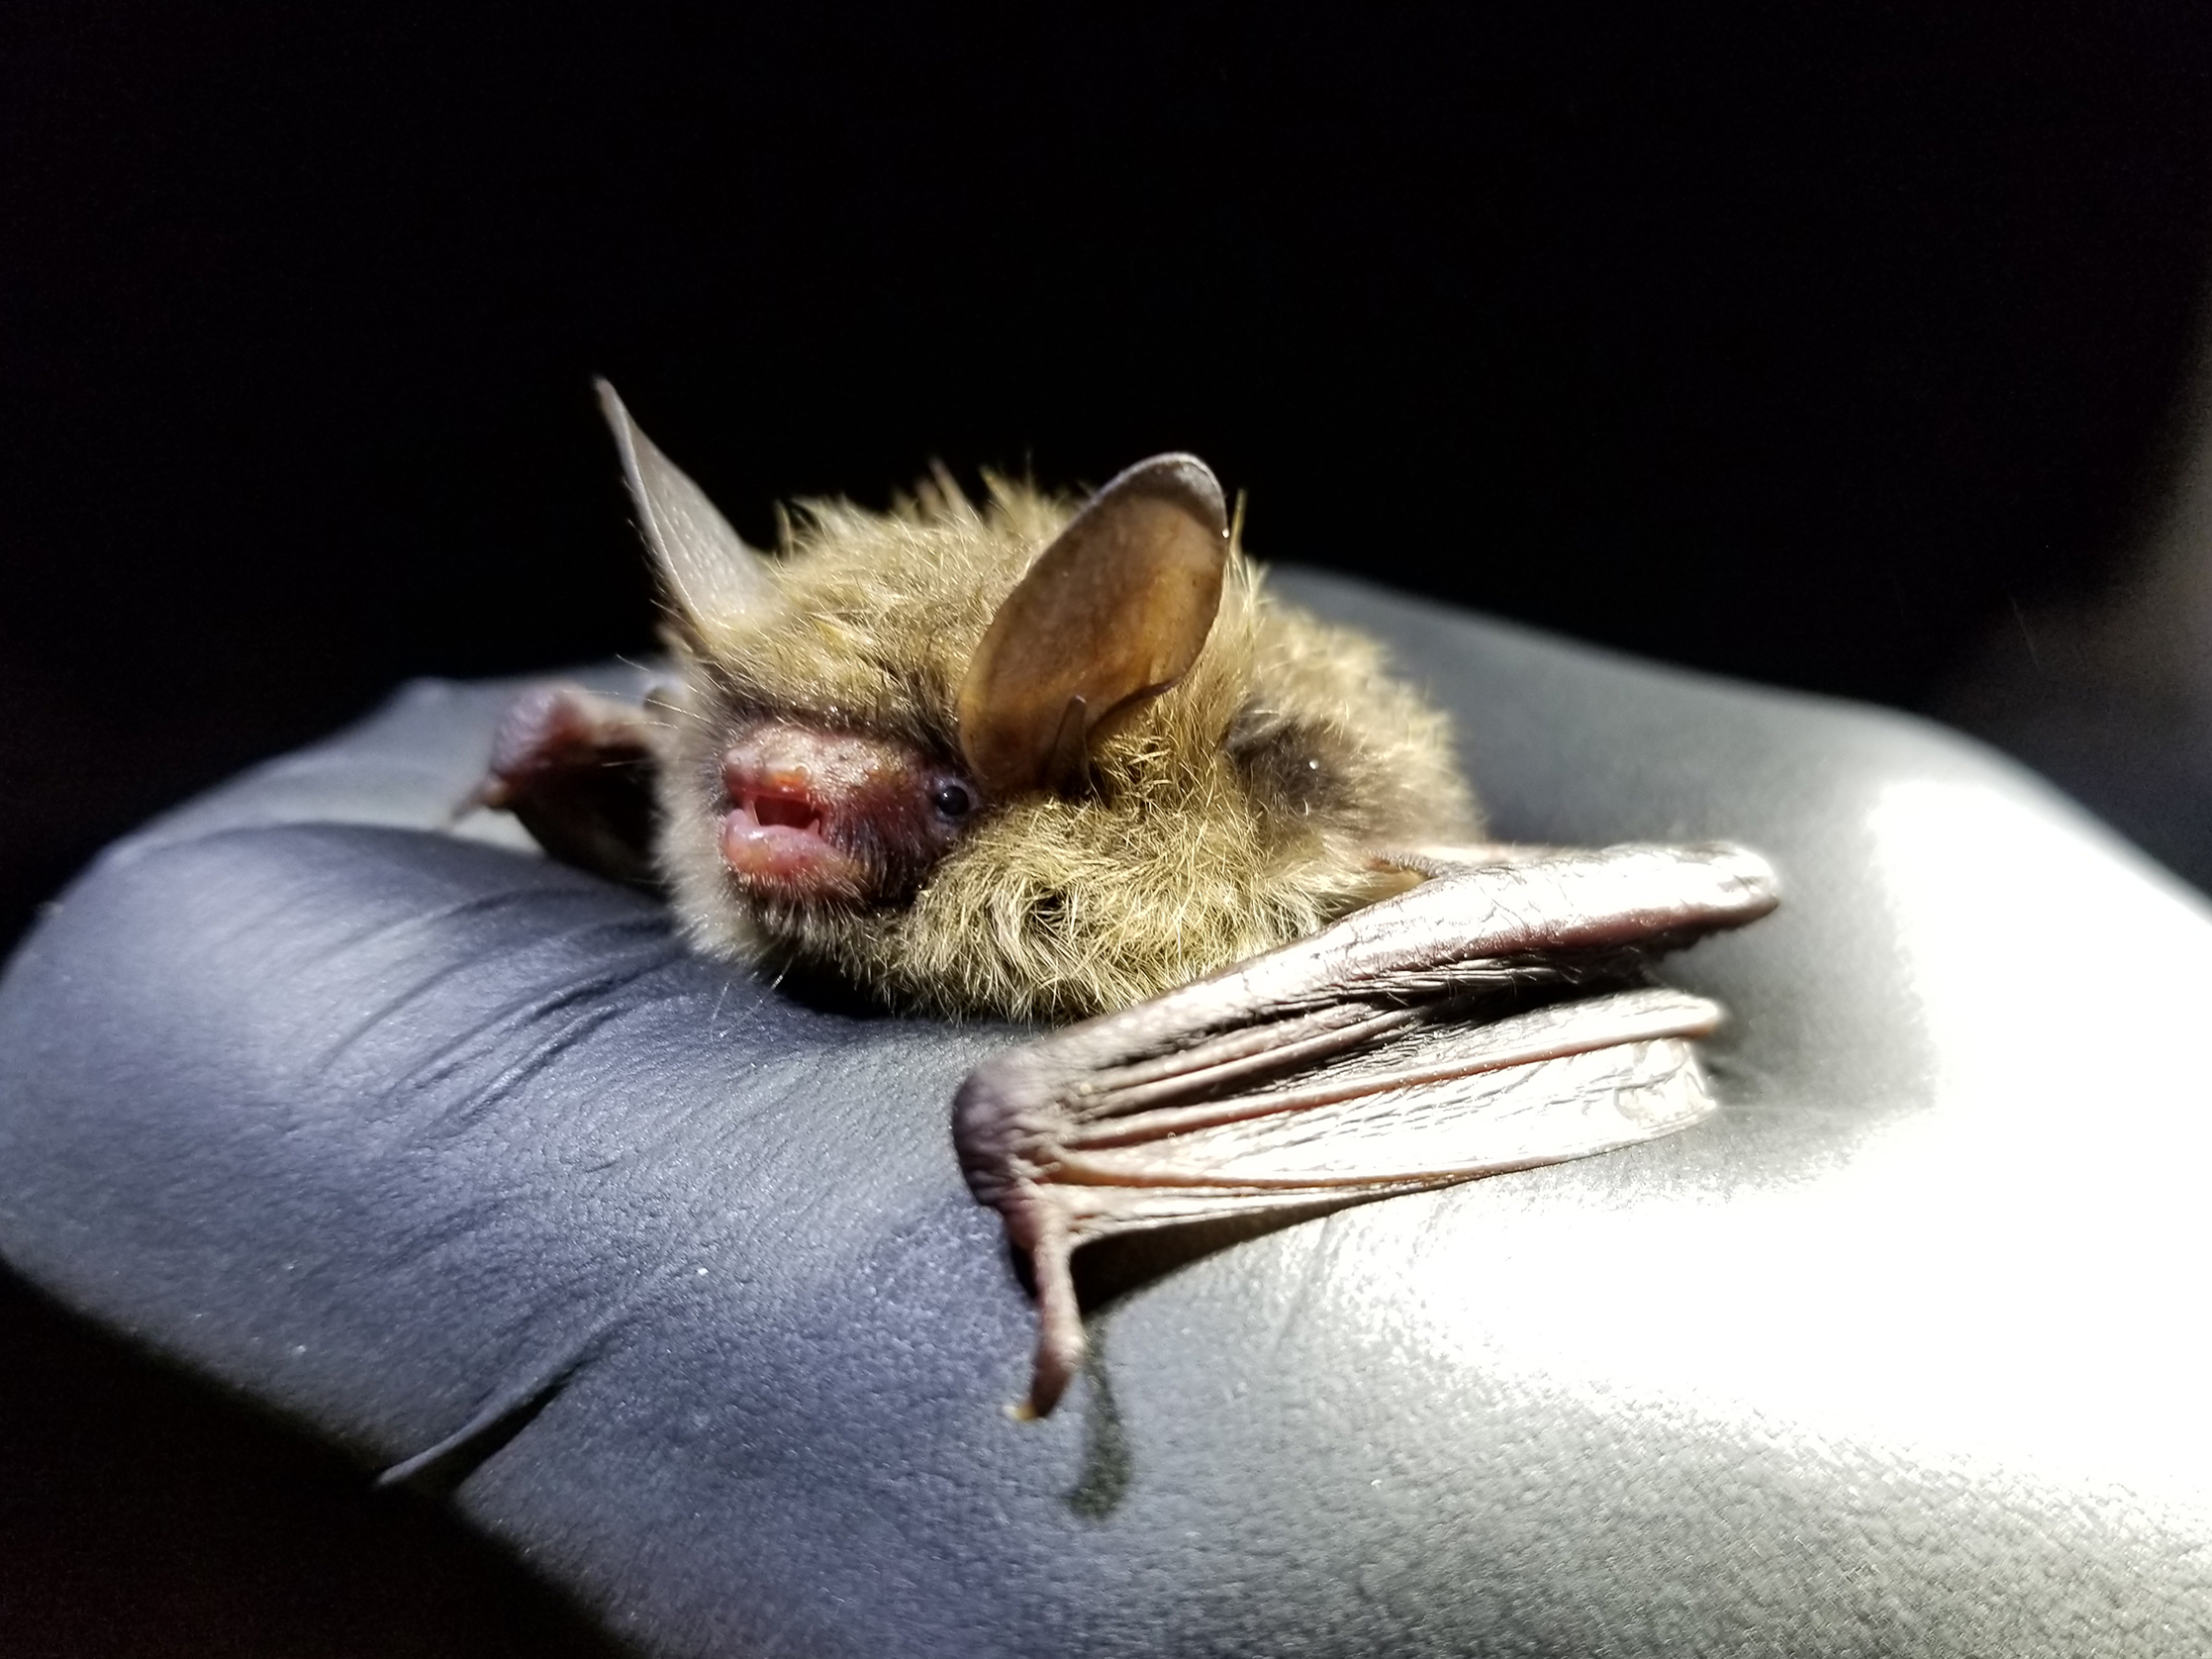 Devastated by disease, federal officials propose listing northern long-eared bat as endangered